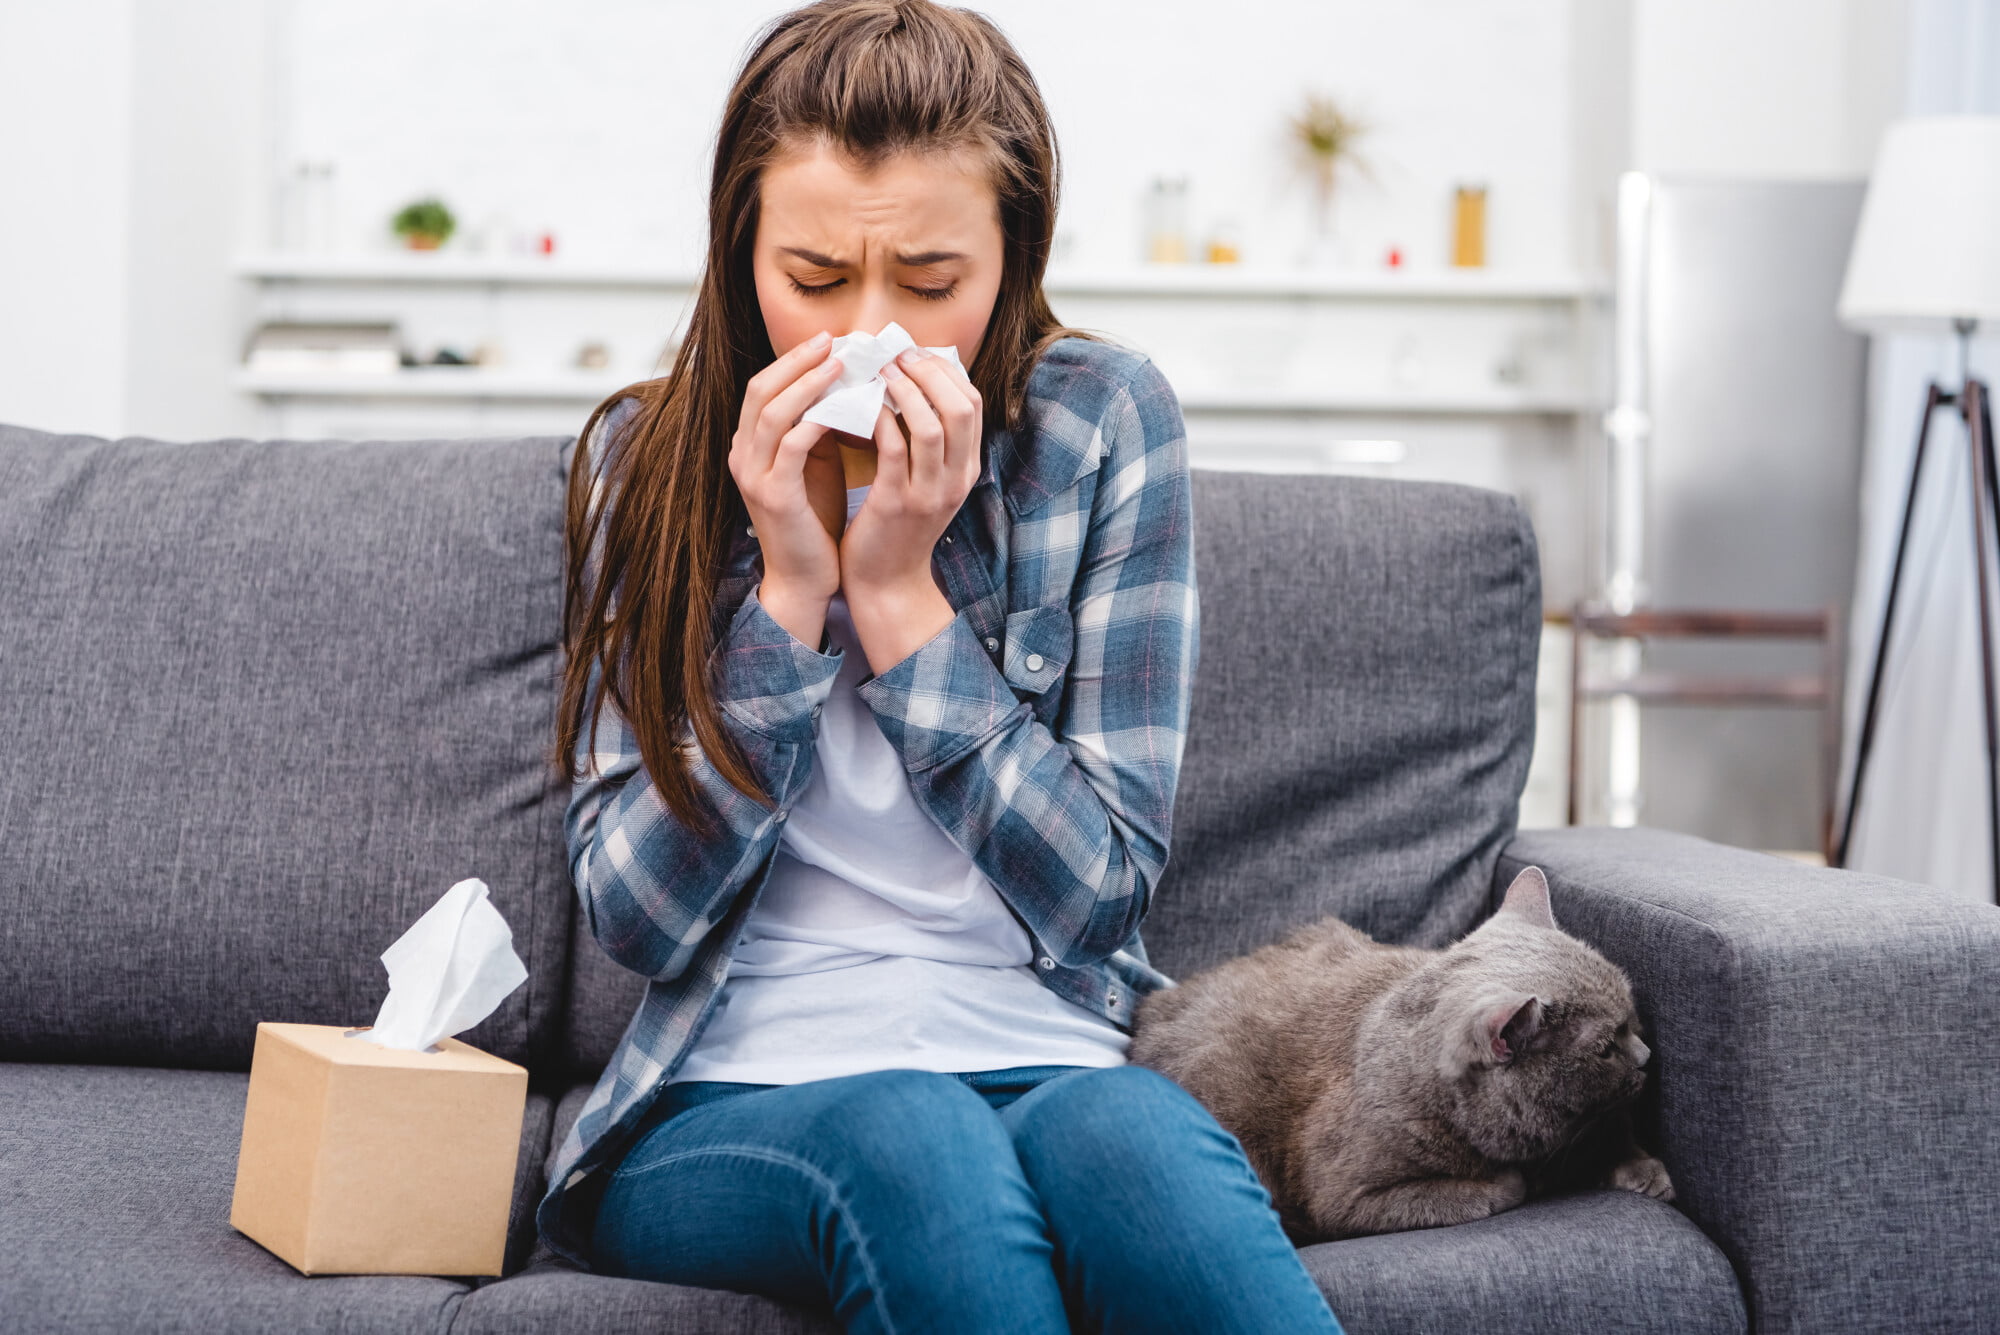 Having good air quality in your house is very important. Do you want to know how to check air quality in your home? Read on to learn more.